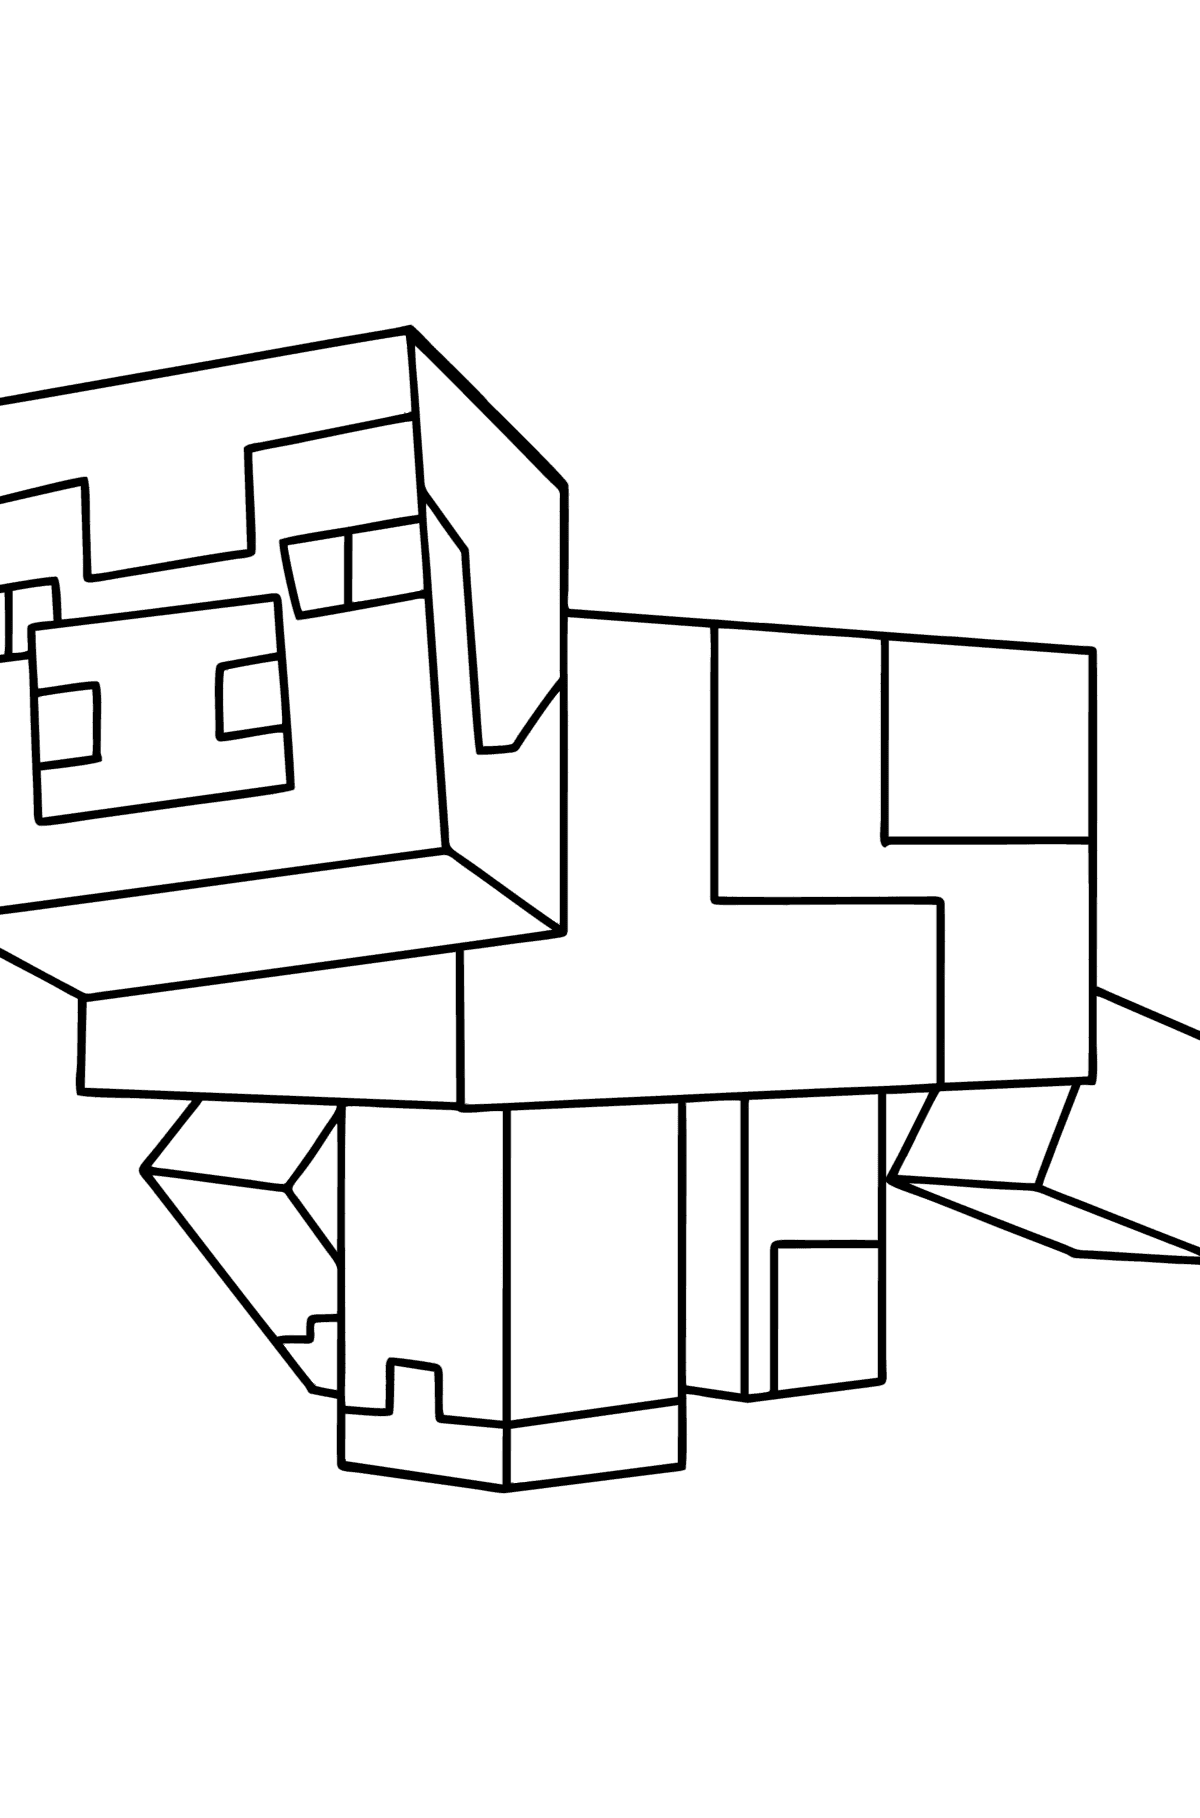 Minecraft Pig coloring page - Coloring Pages for Kids